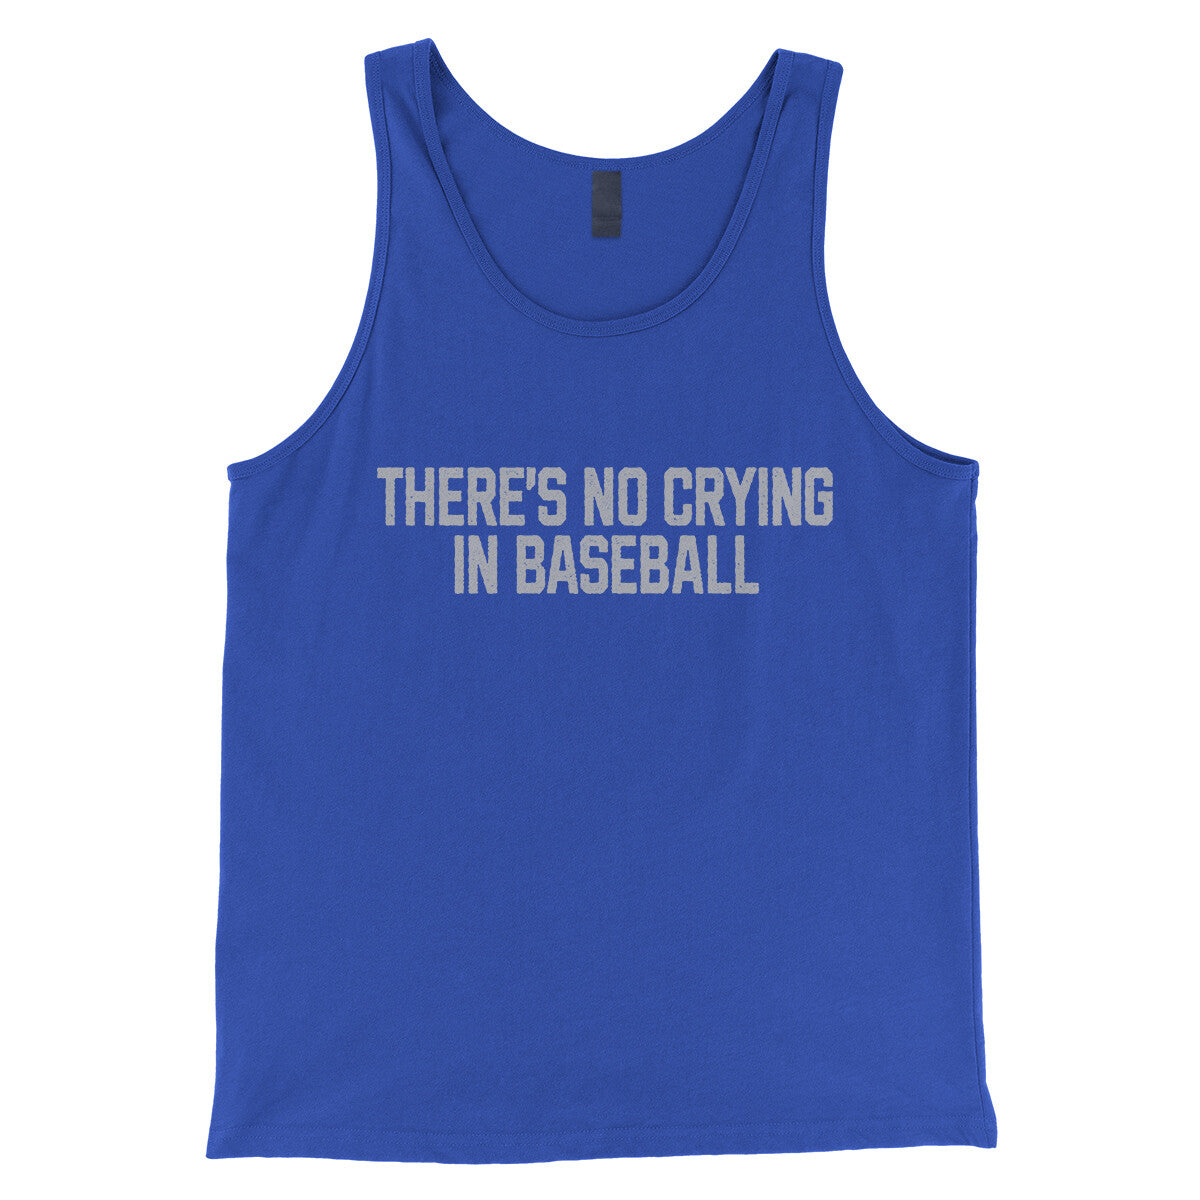 There's No Crying in Baseball in True Royal Color